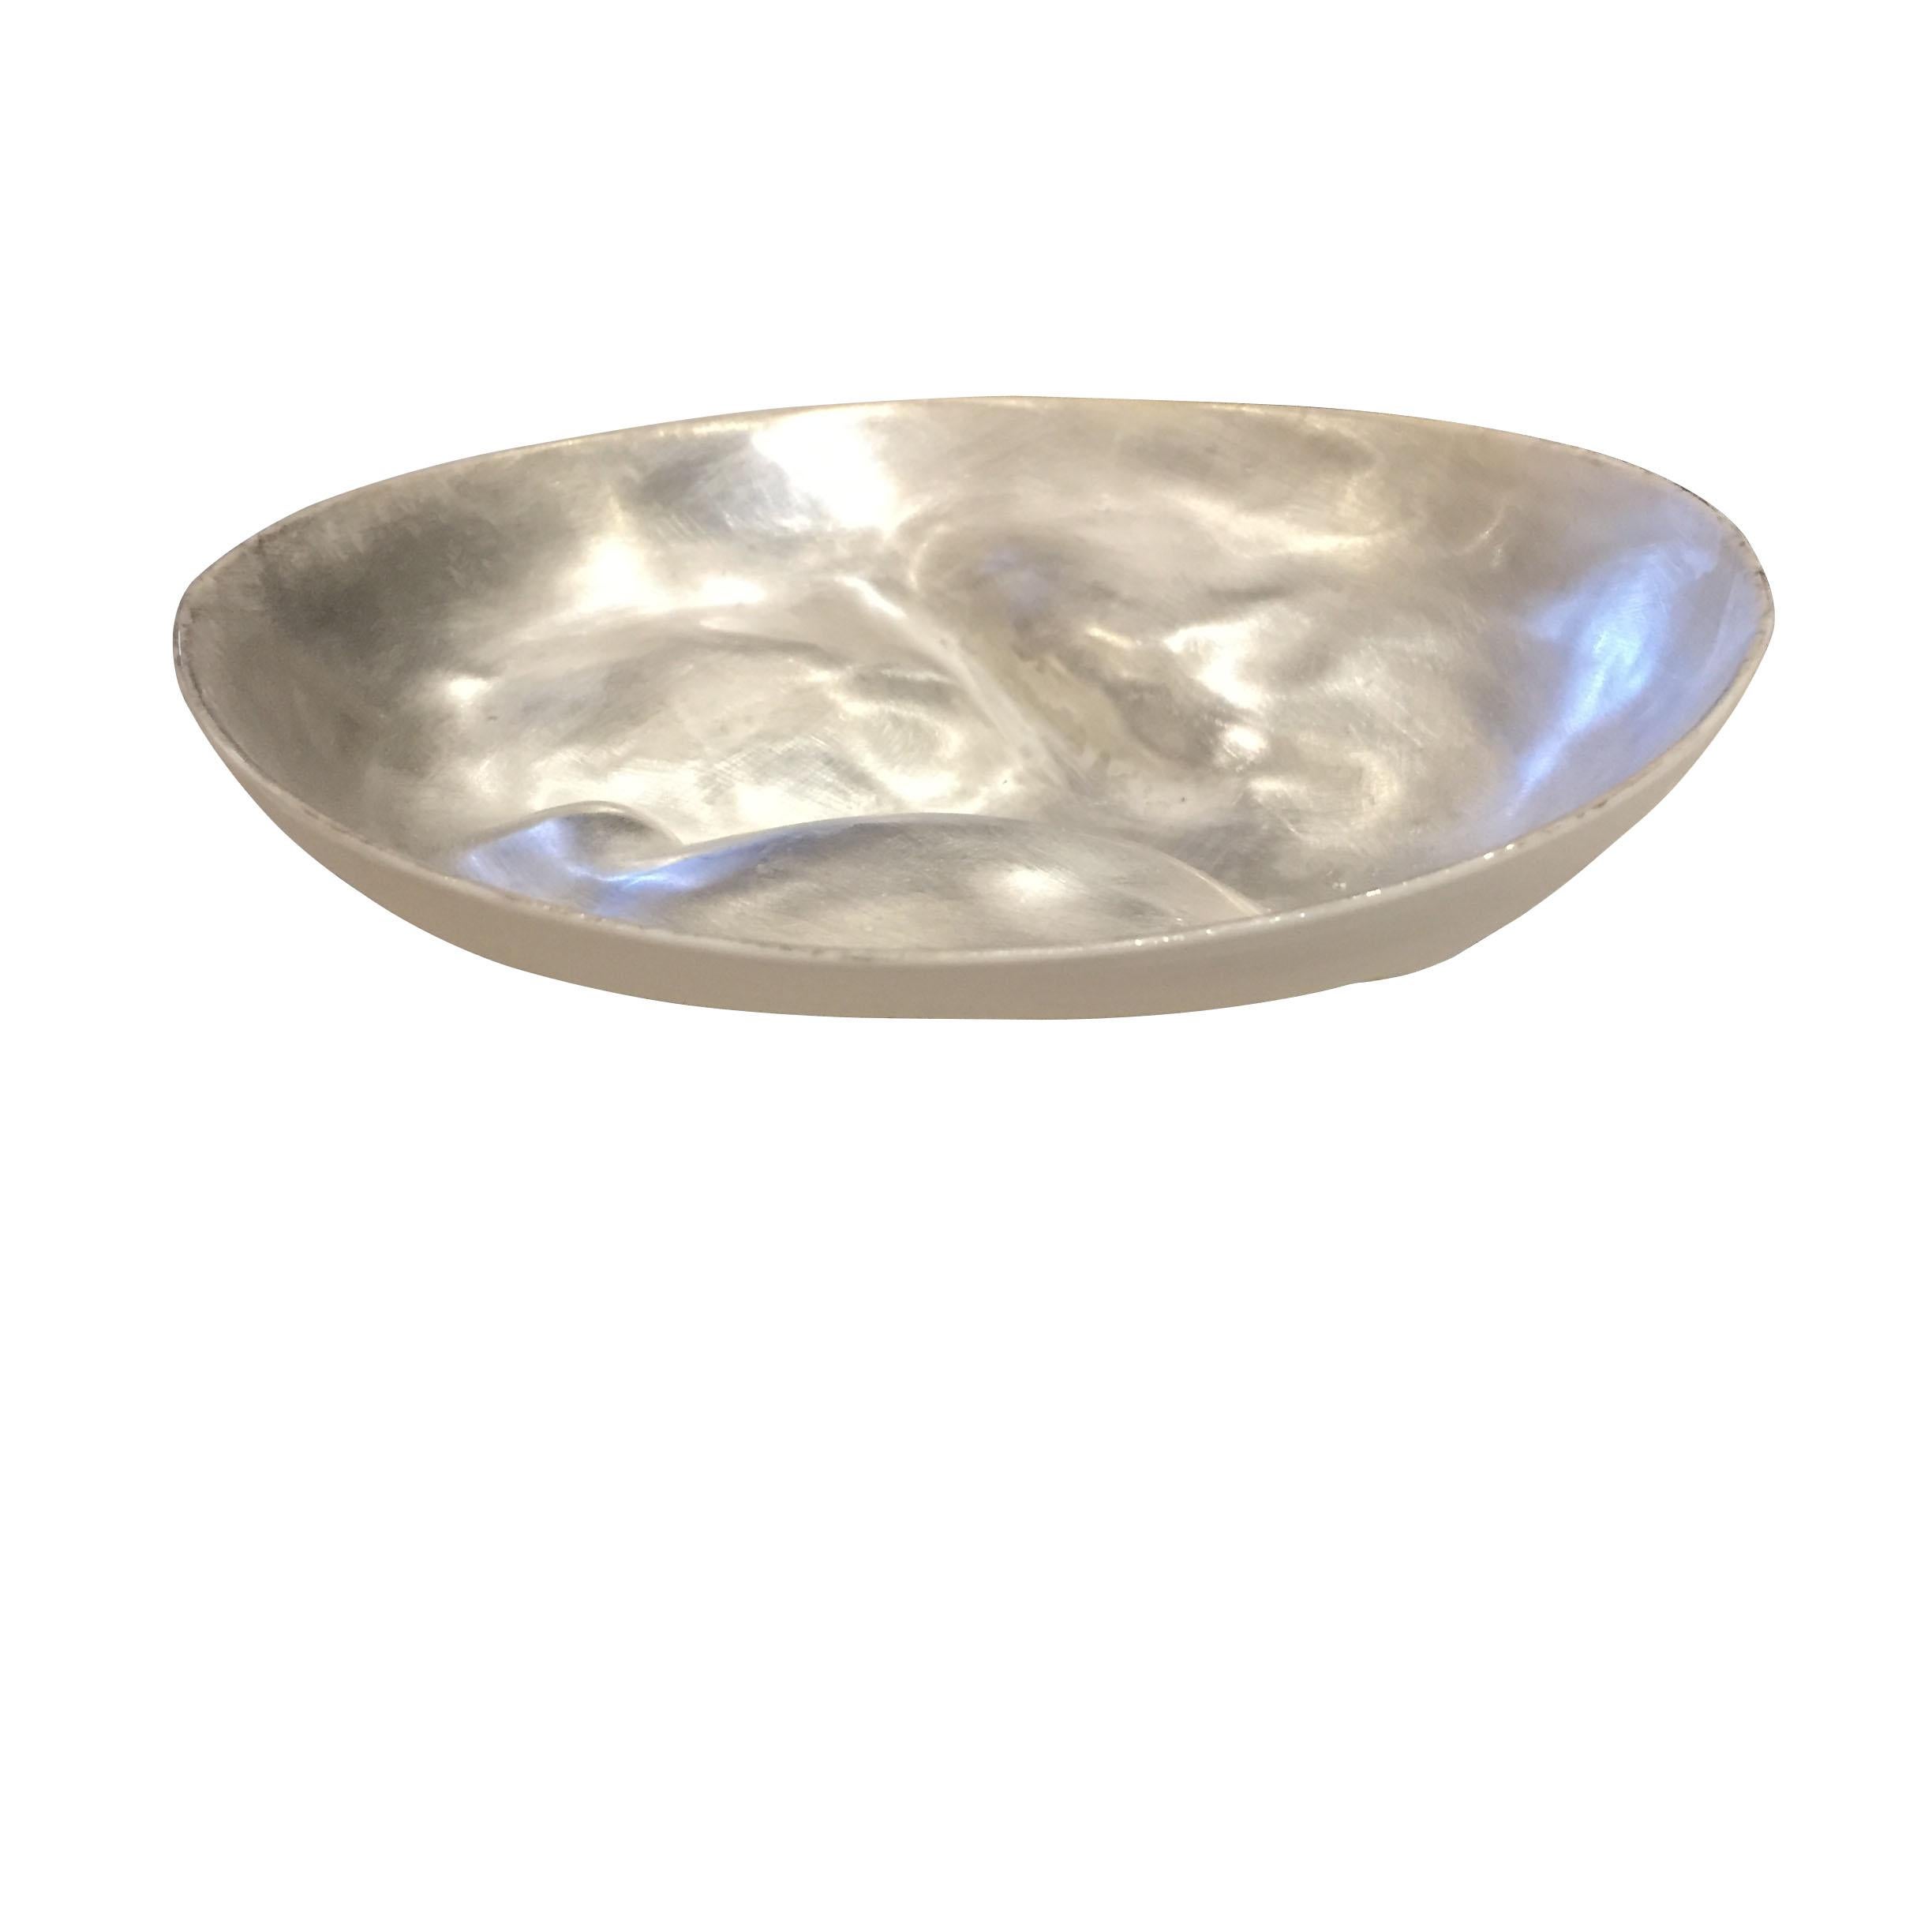 Italian handmade silver leaf small bowl.
Silver leaf on cream fine ceramic in a beautiful organic shape.
Similar bowls are available in 10